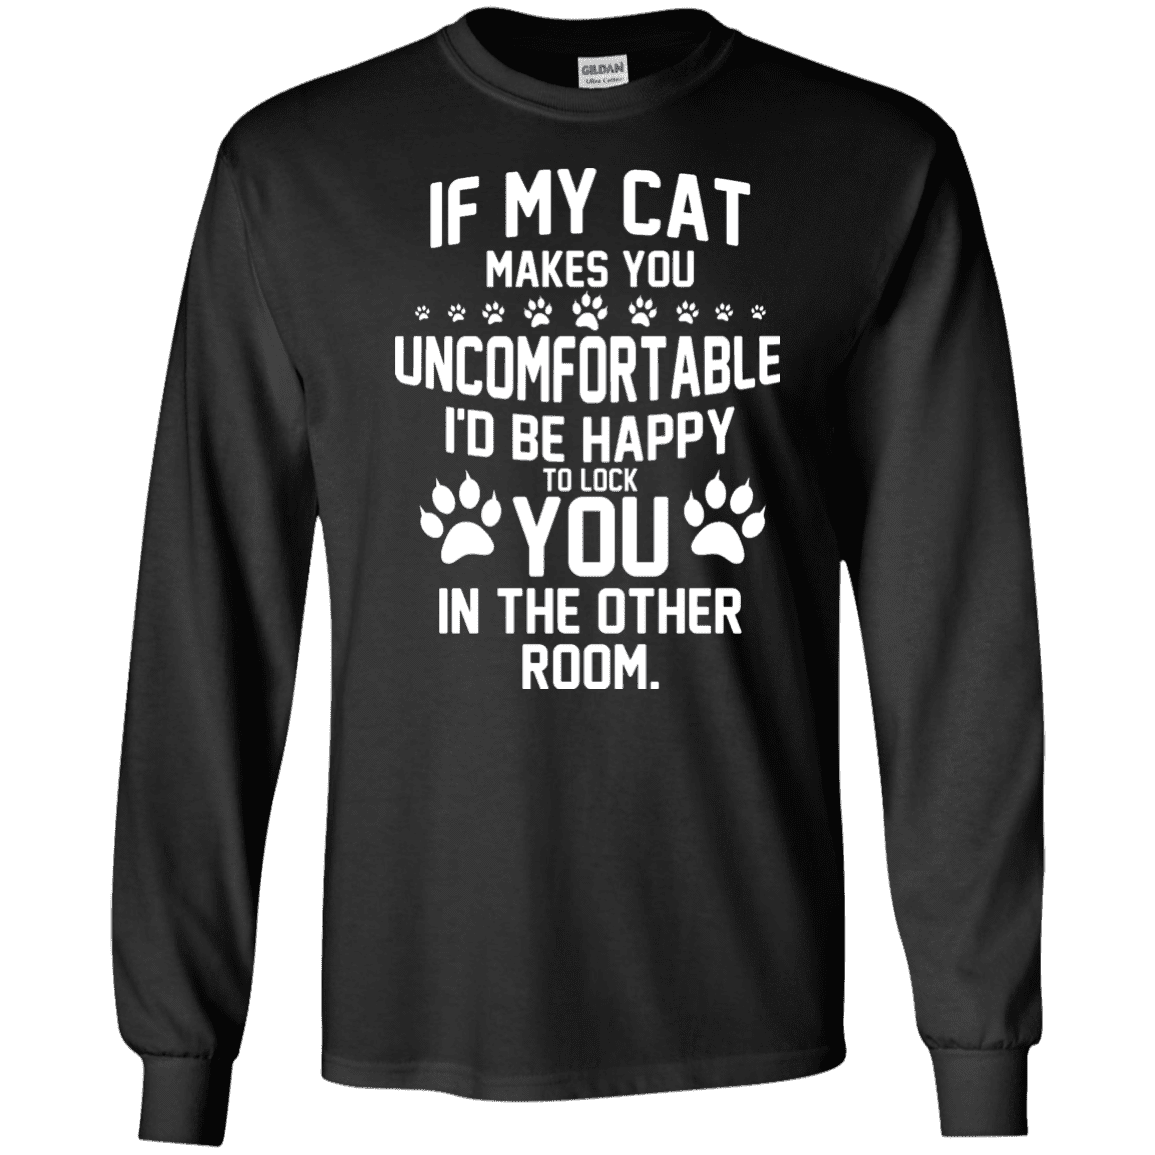 If My Cat makes You Uncomfortable - Long Sleeve T Shirt.